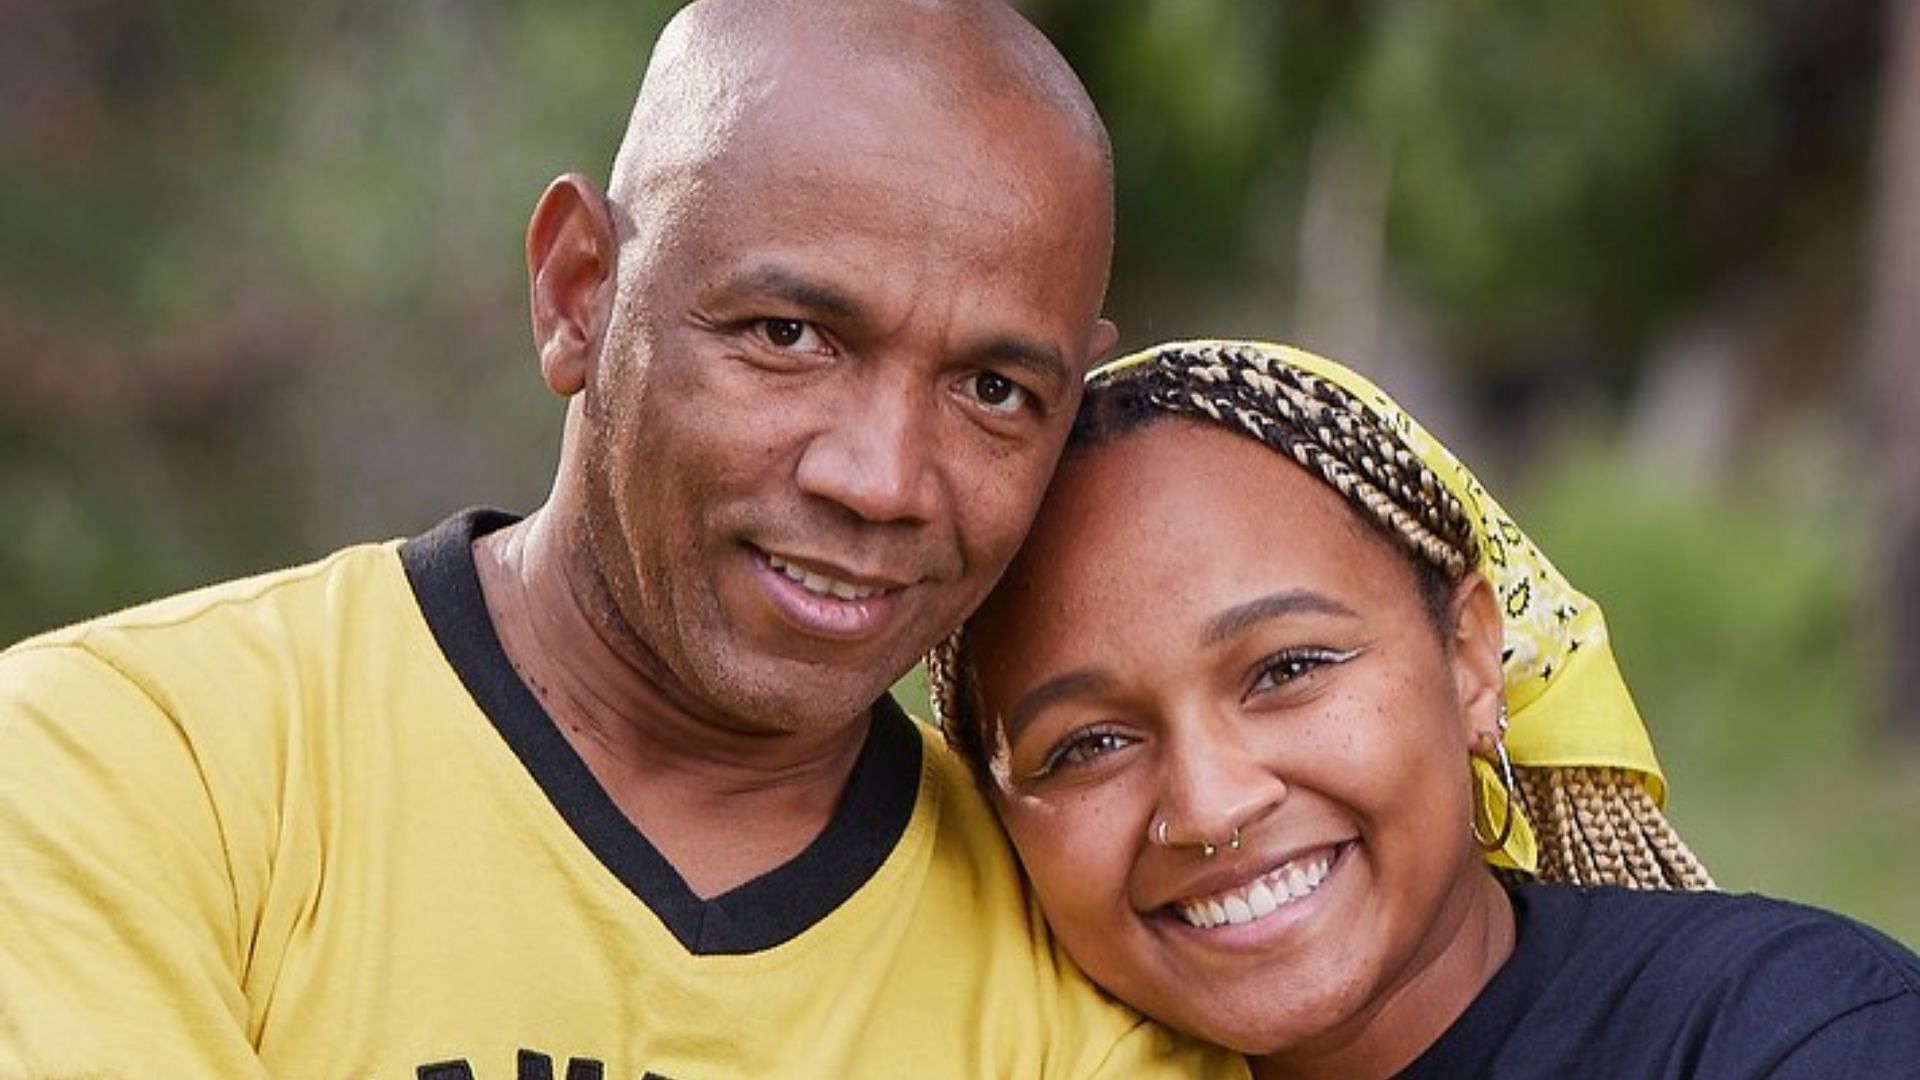 Father-daughter duo from Brooklyn set to compete in the Amazing Race